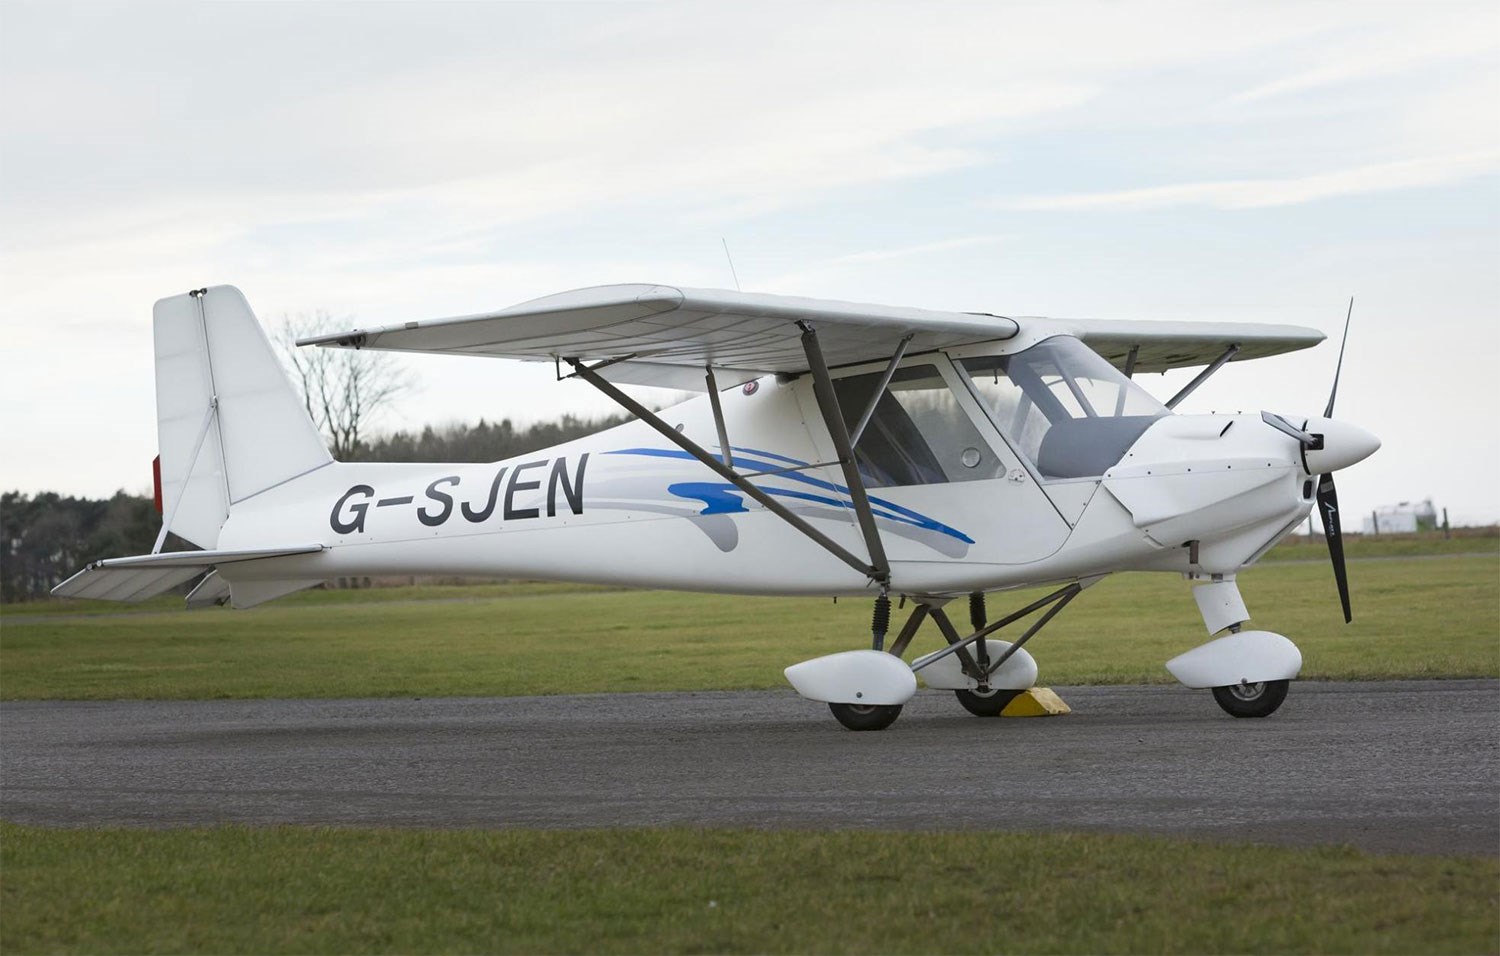 A white Ikarus C42 aircraft on a runway